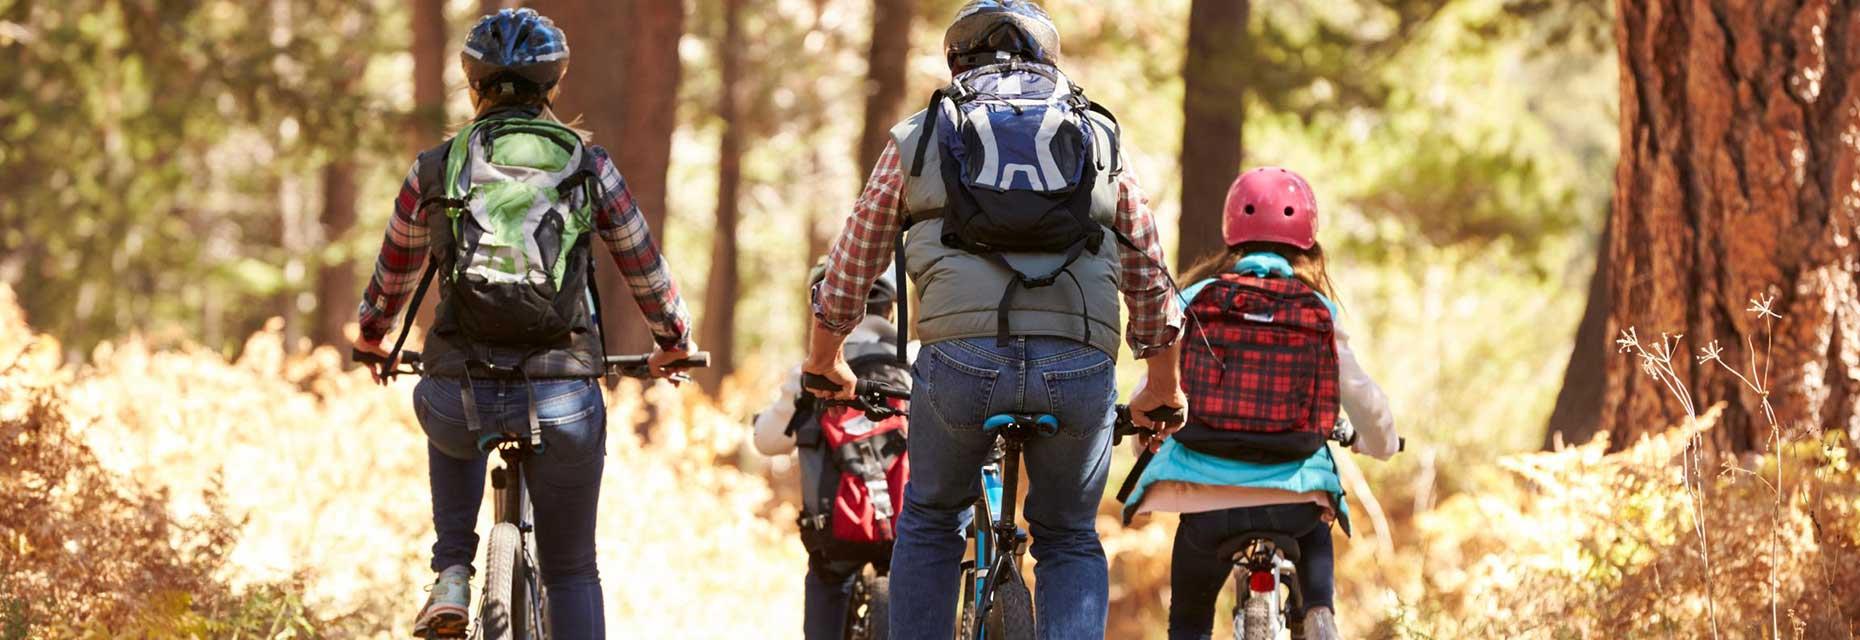 The Campsite Les Ballastières in the Southern Vosges provides information and maps of cycling routes, so that you can plan beautiful cycling trips with your family